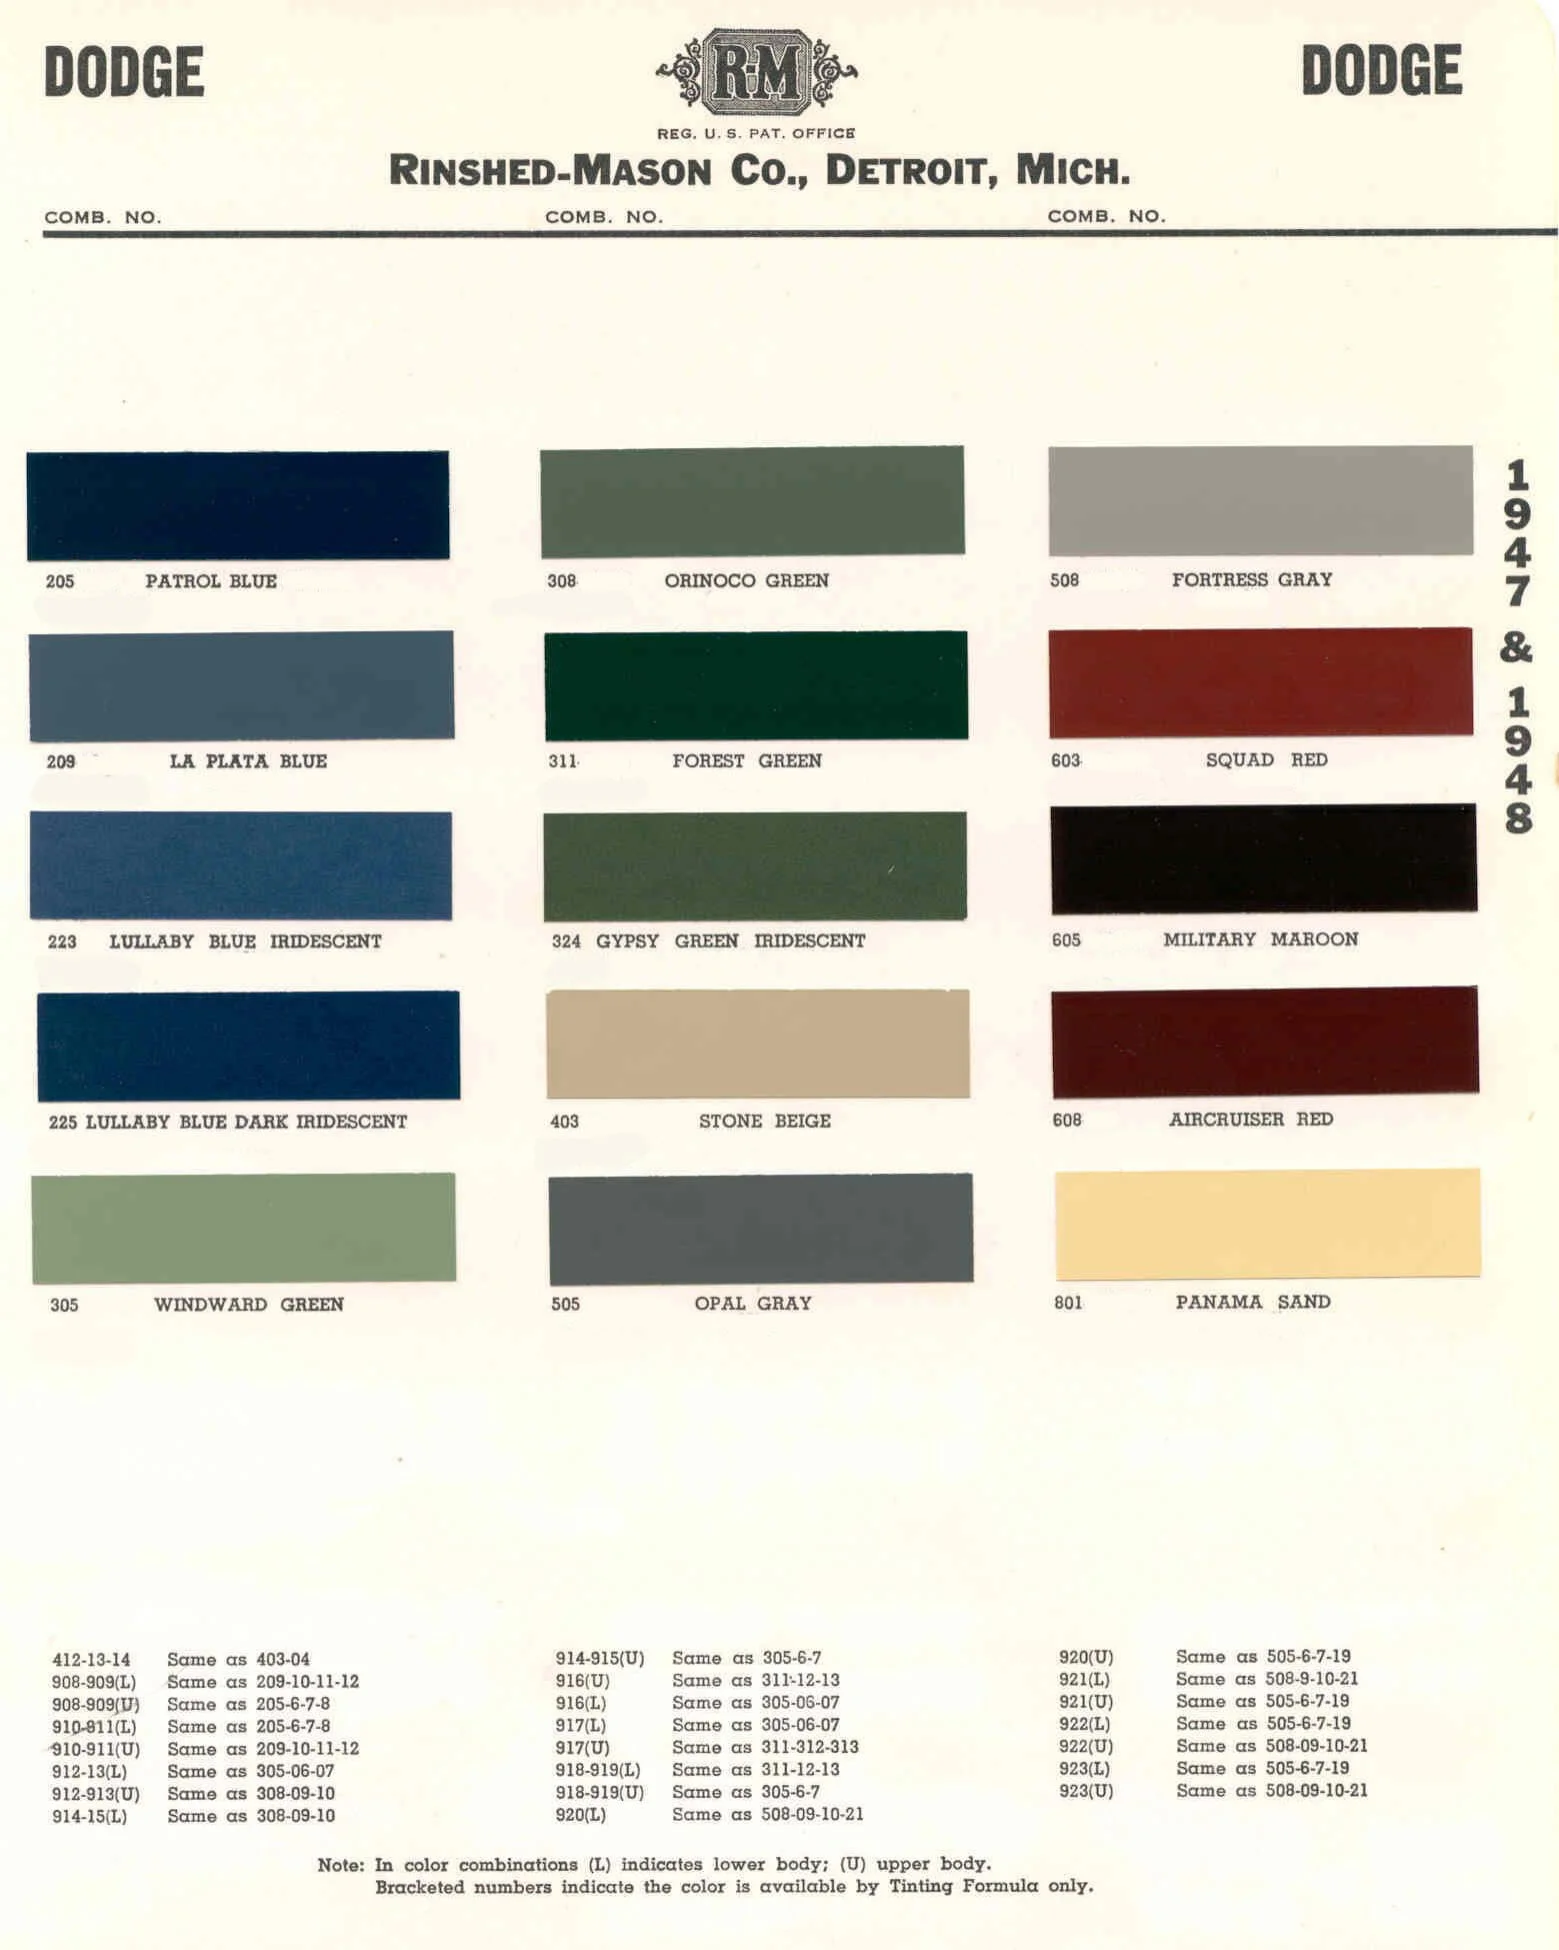 Summary Of Colors used on all Dodge Vehicles in 1947-1949